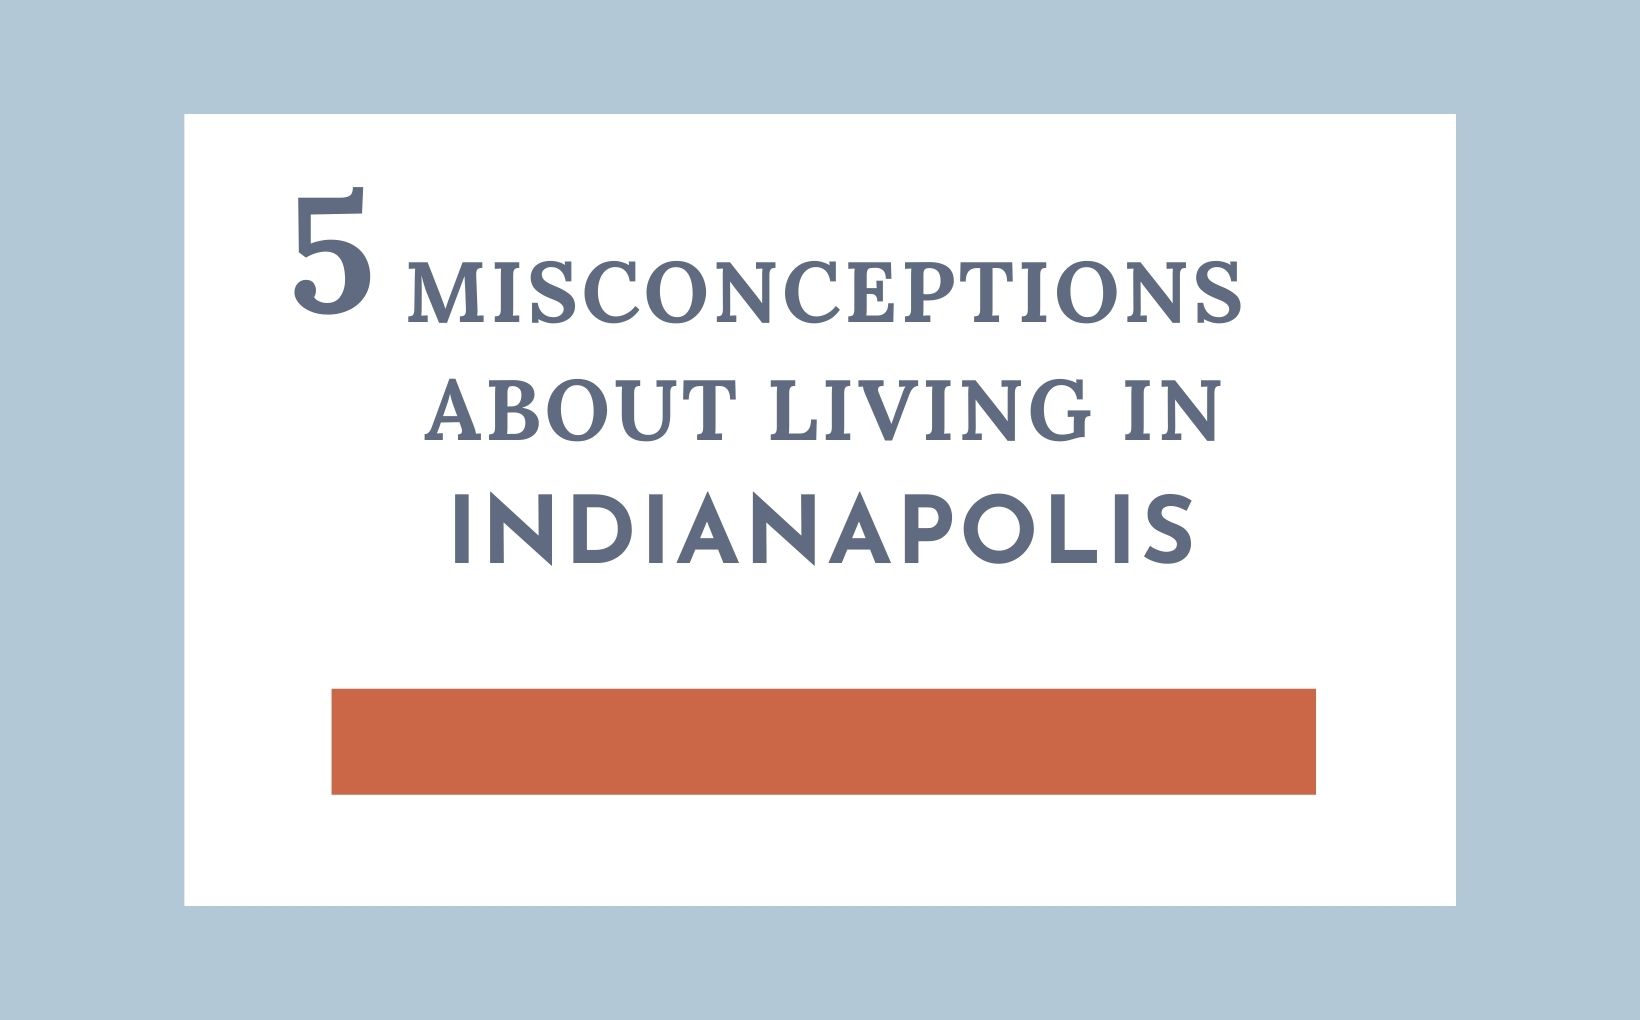 5 Misconceptions about living in, IN feature image